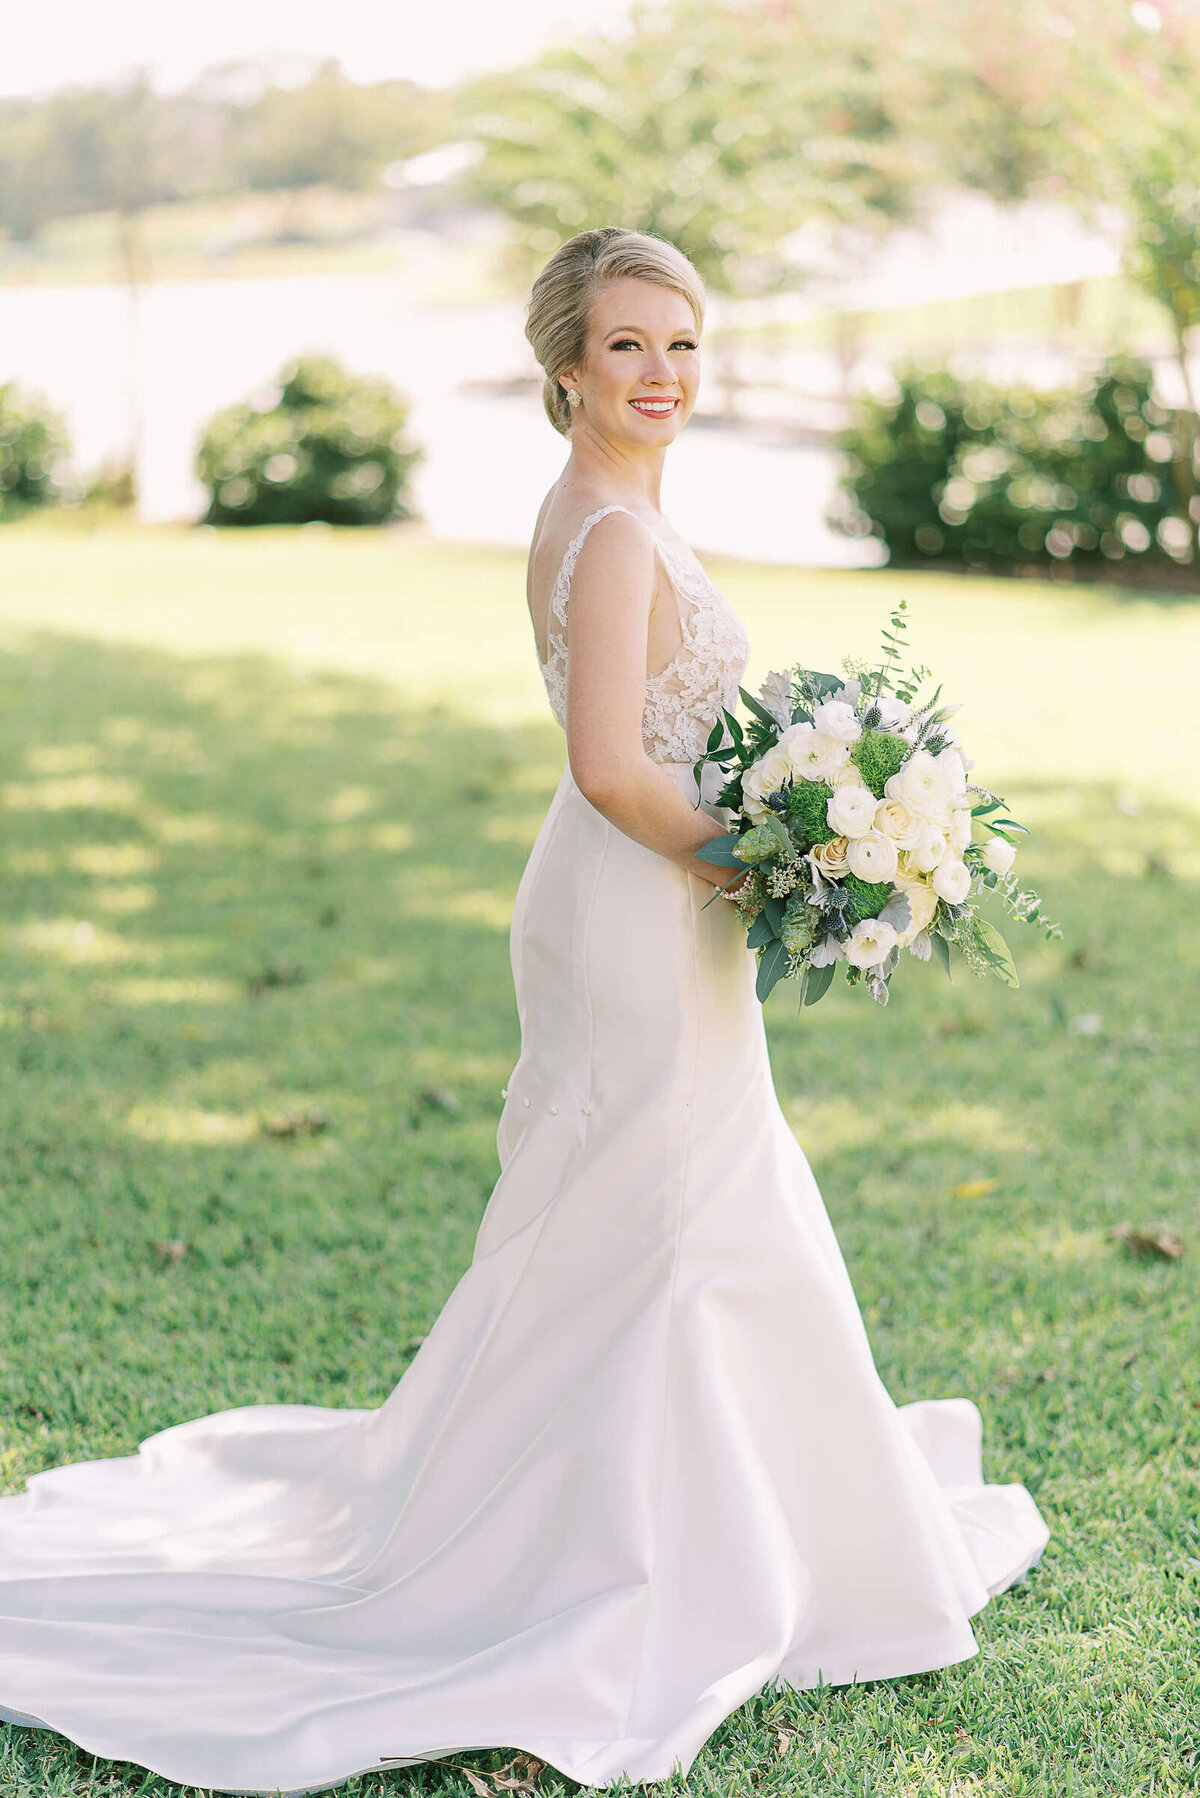 Happy bride with blonde hair holds bouquet and poses in her white wedding dress